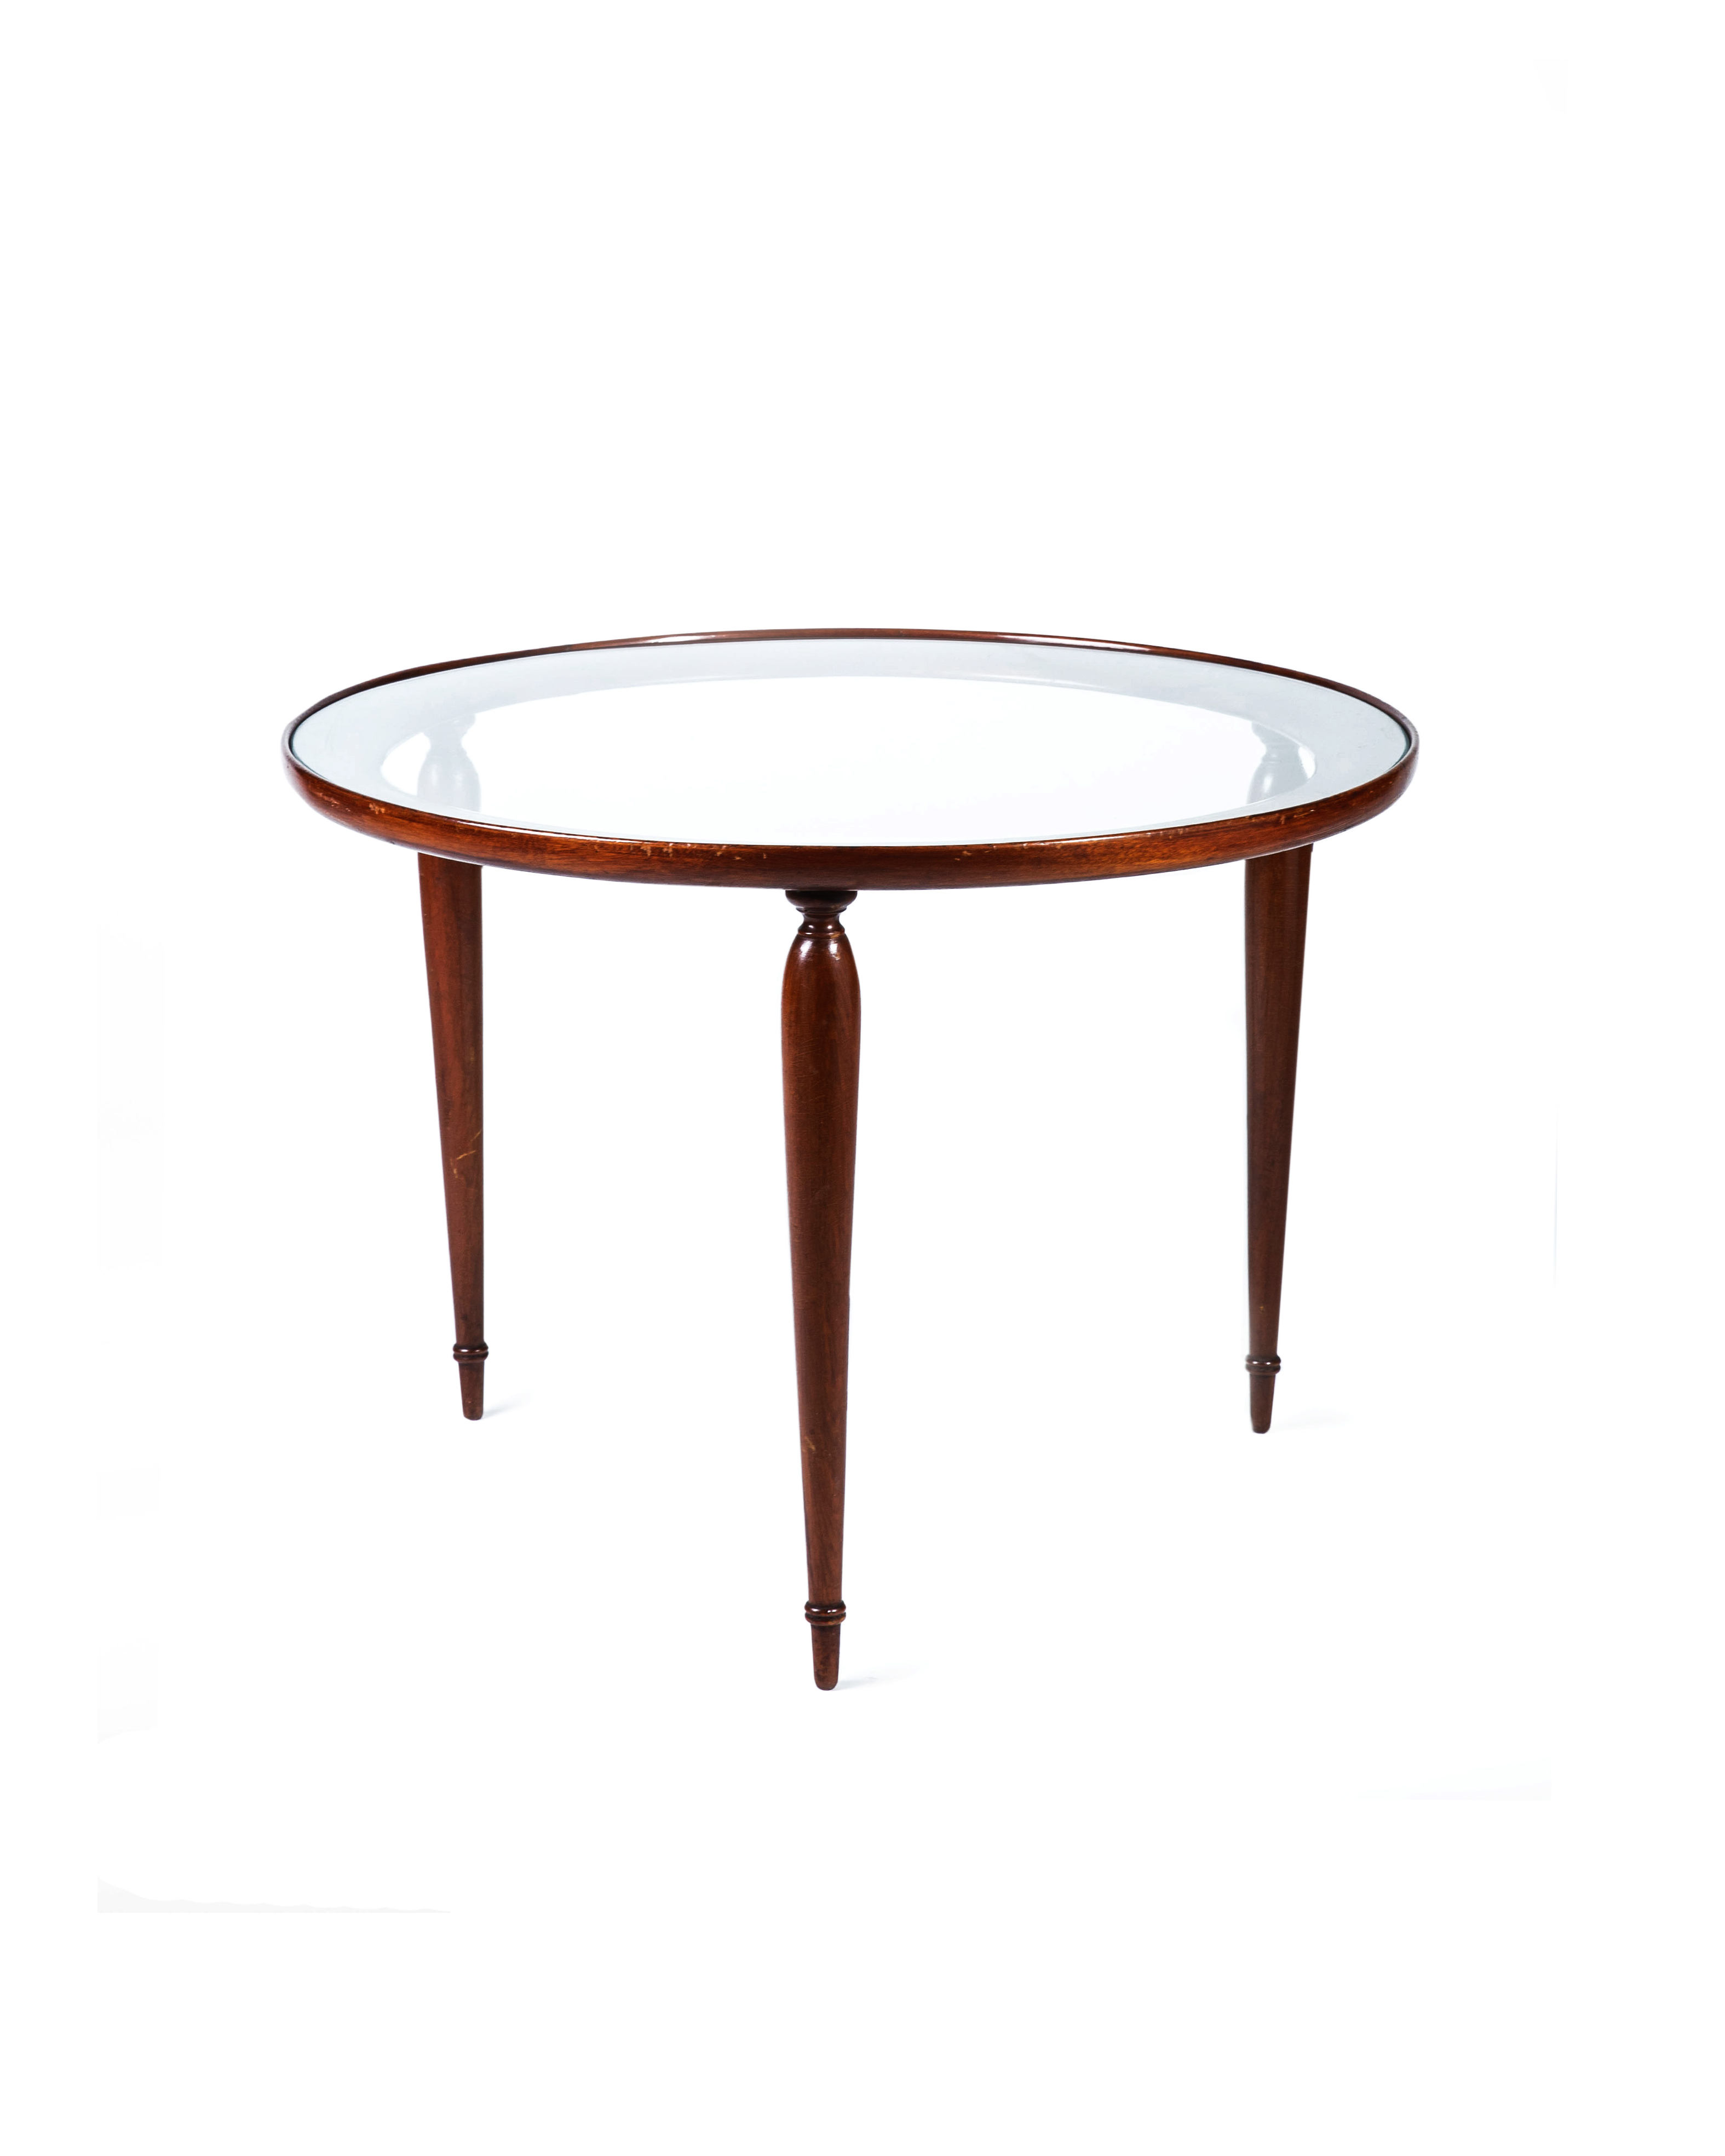 Wood and glass round coffee table